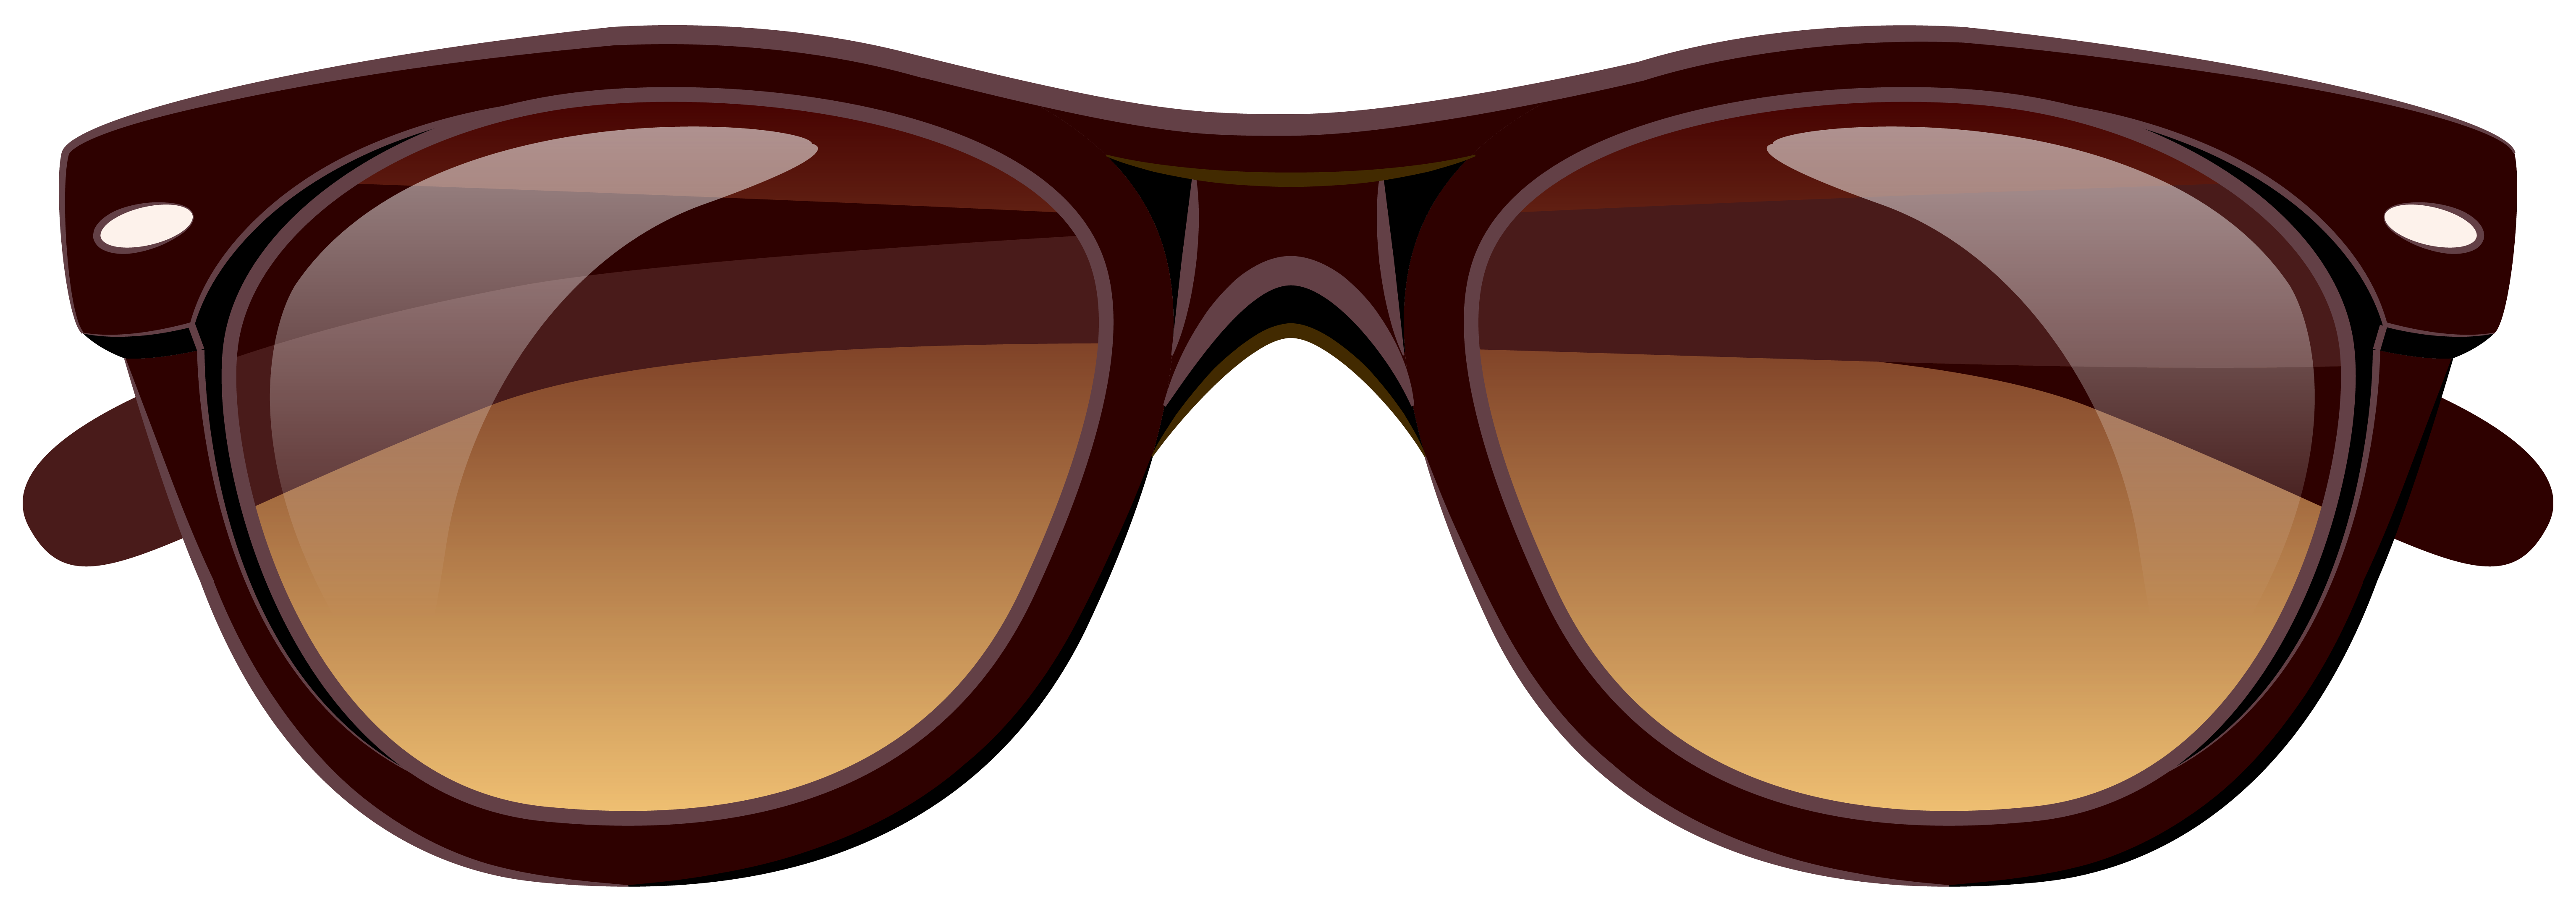 Brown Sunglasses Picture HD Image Free PNG Clipart